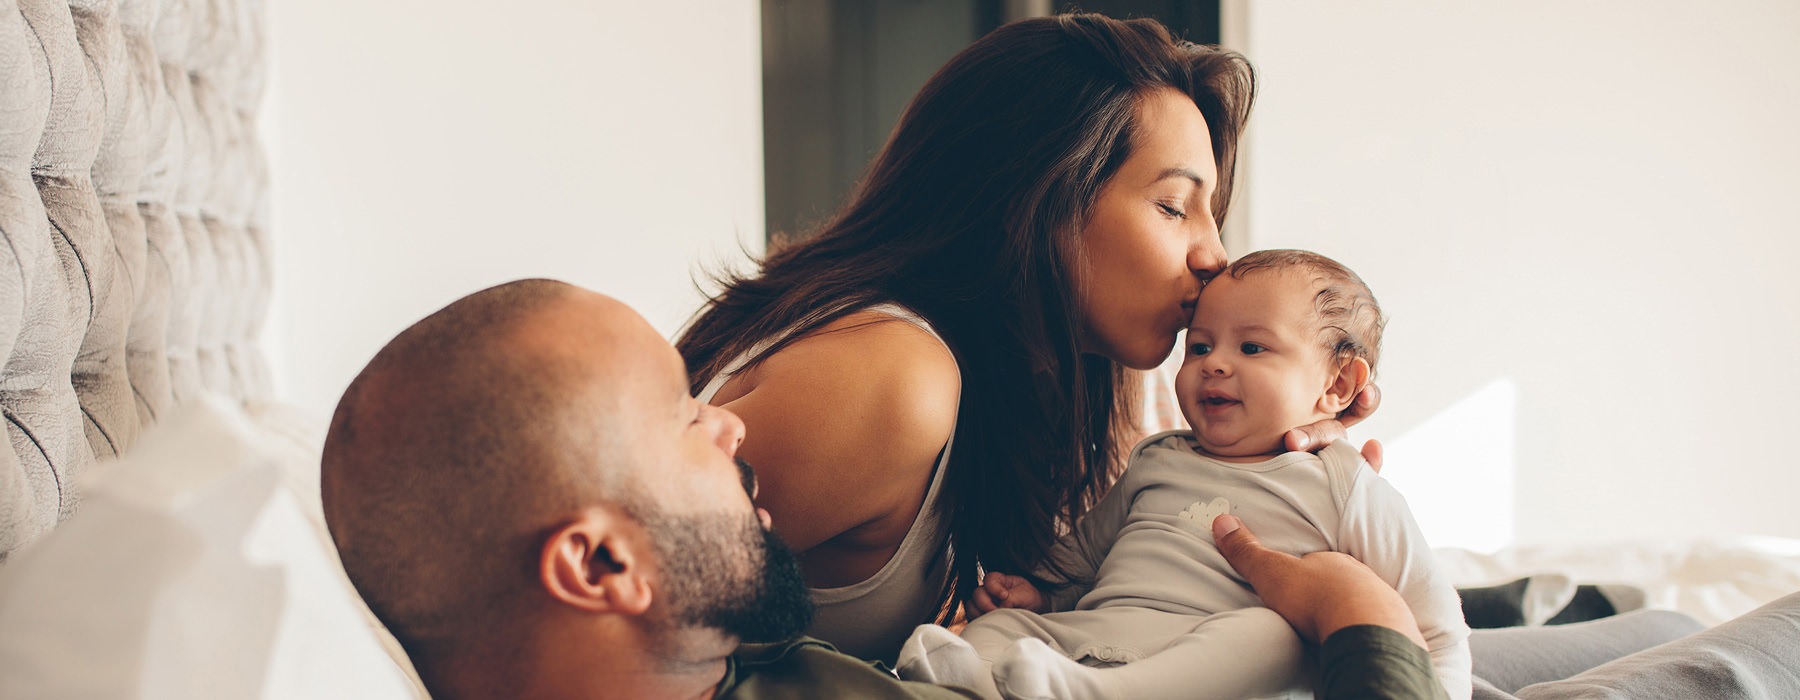 loving parents hold their baby on their bed